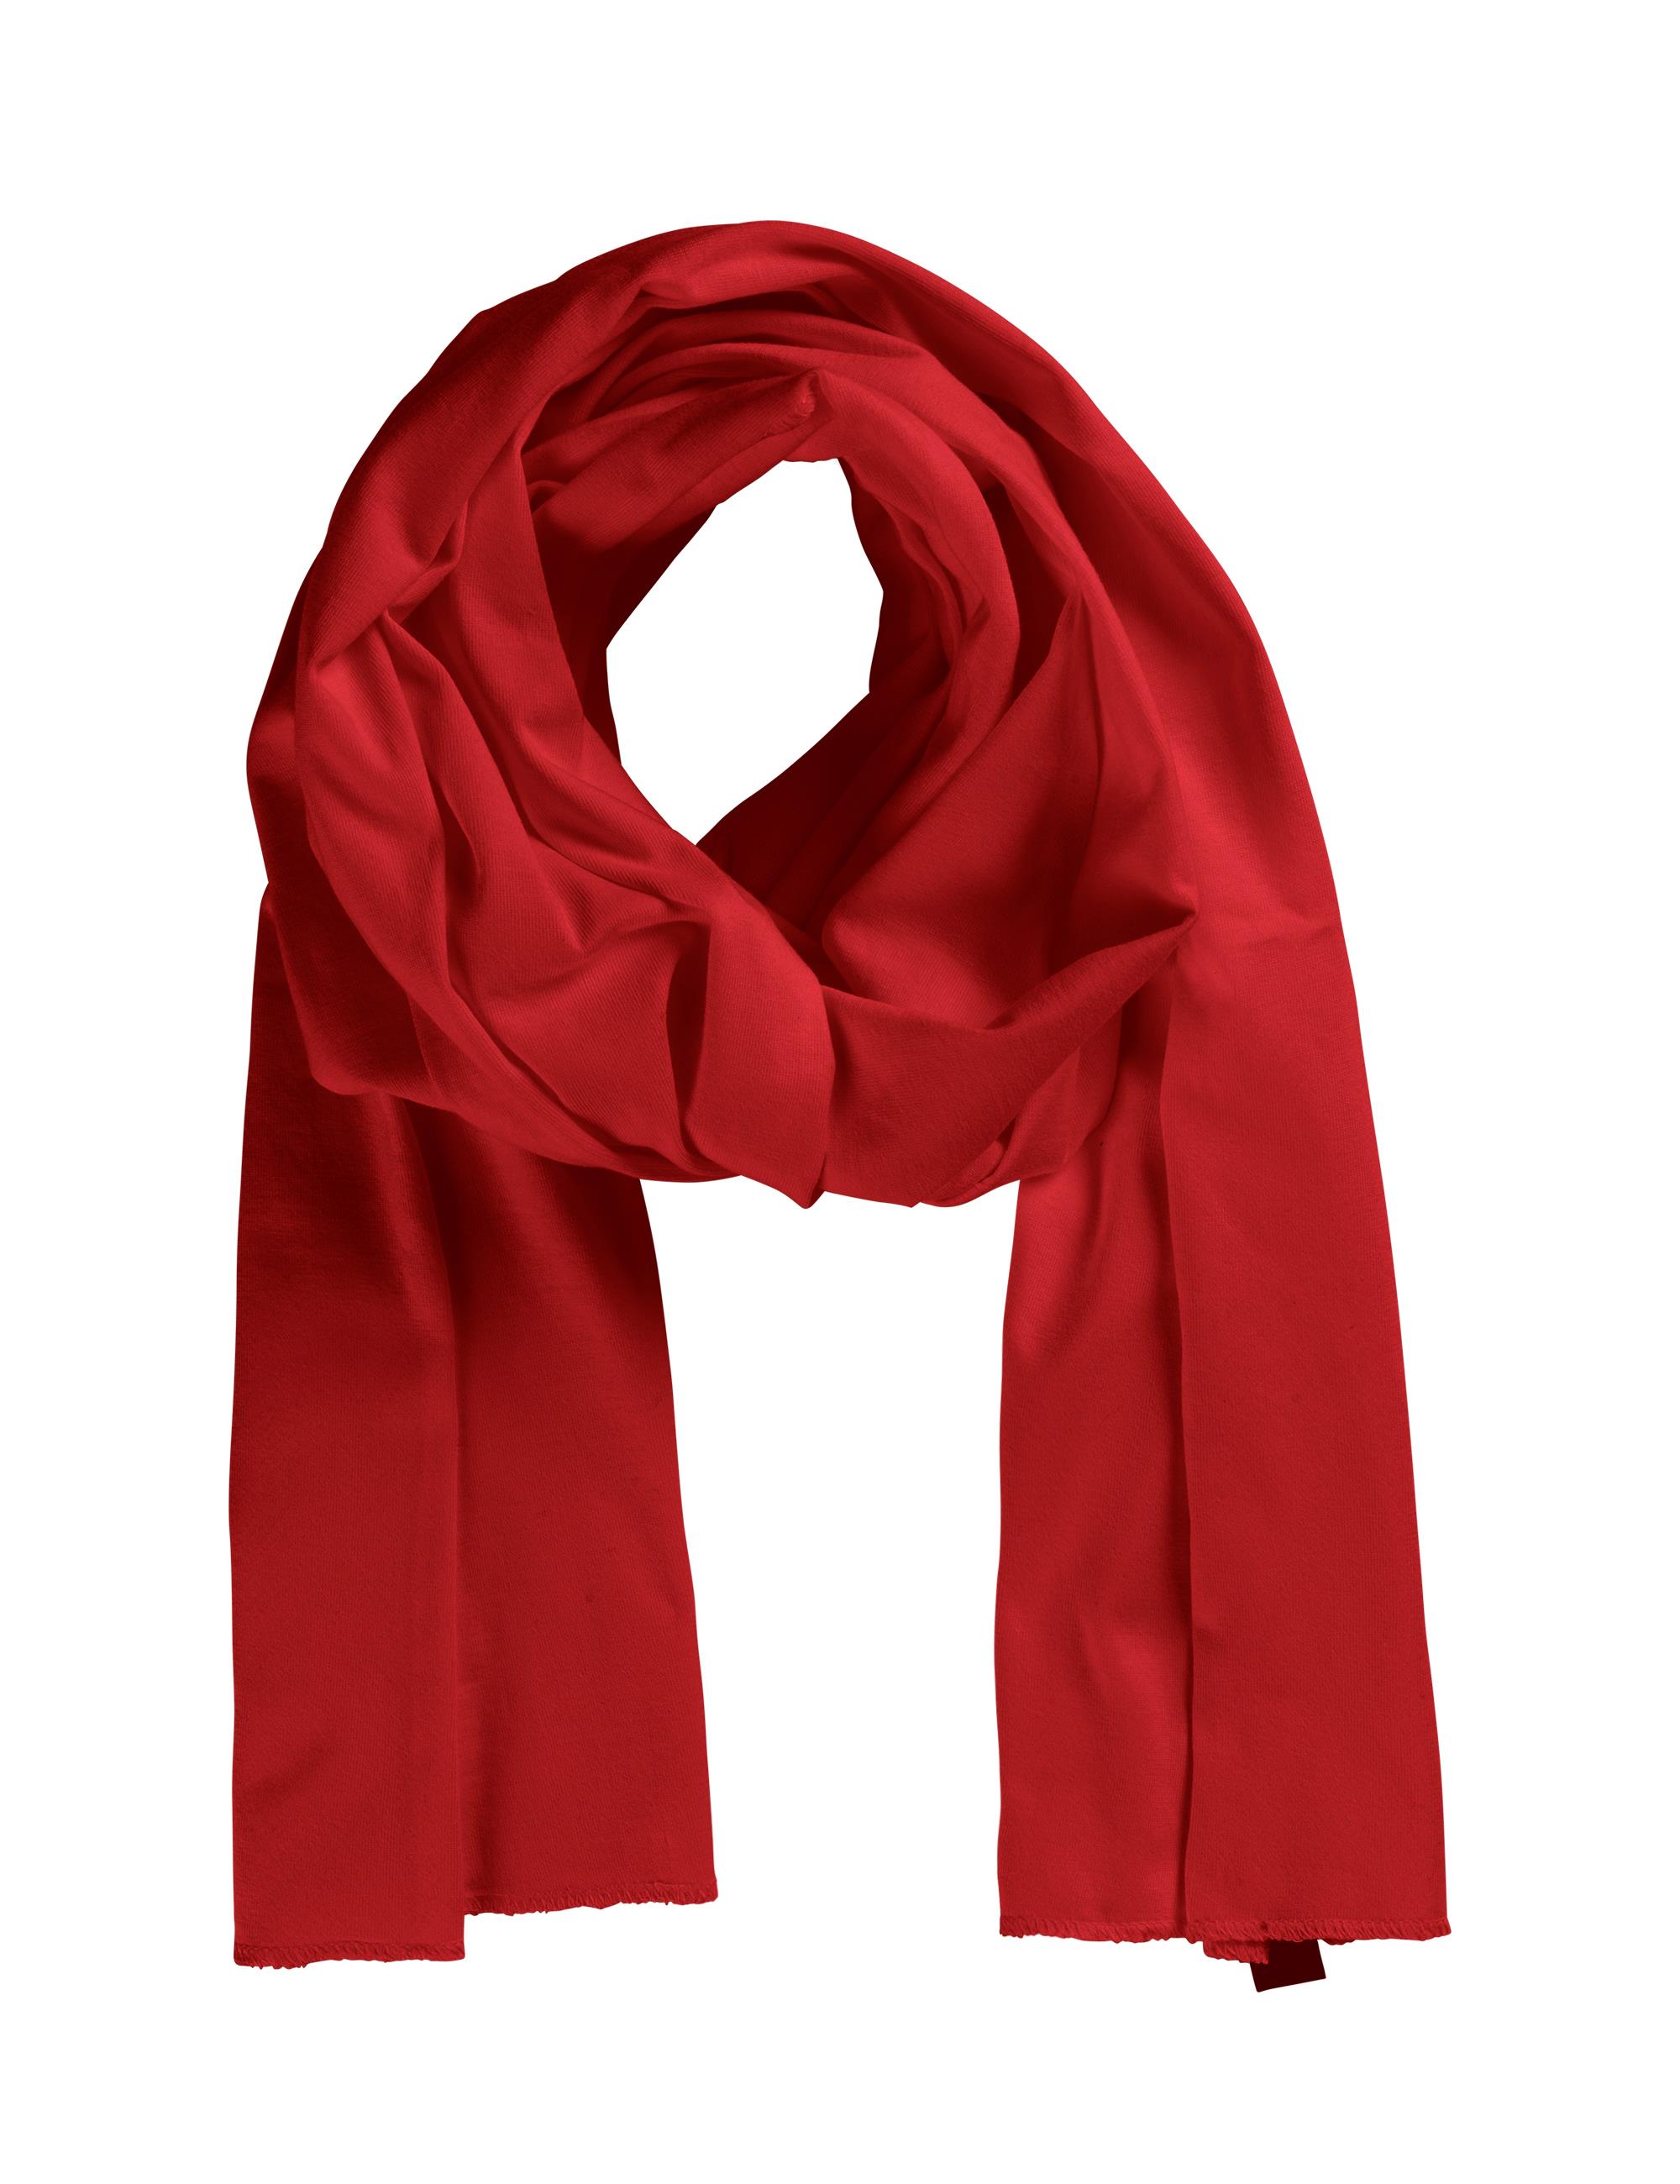 Organic Fairtrade Jersey Scarf Neutral® Red